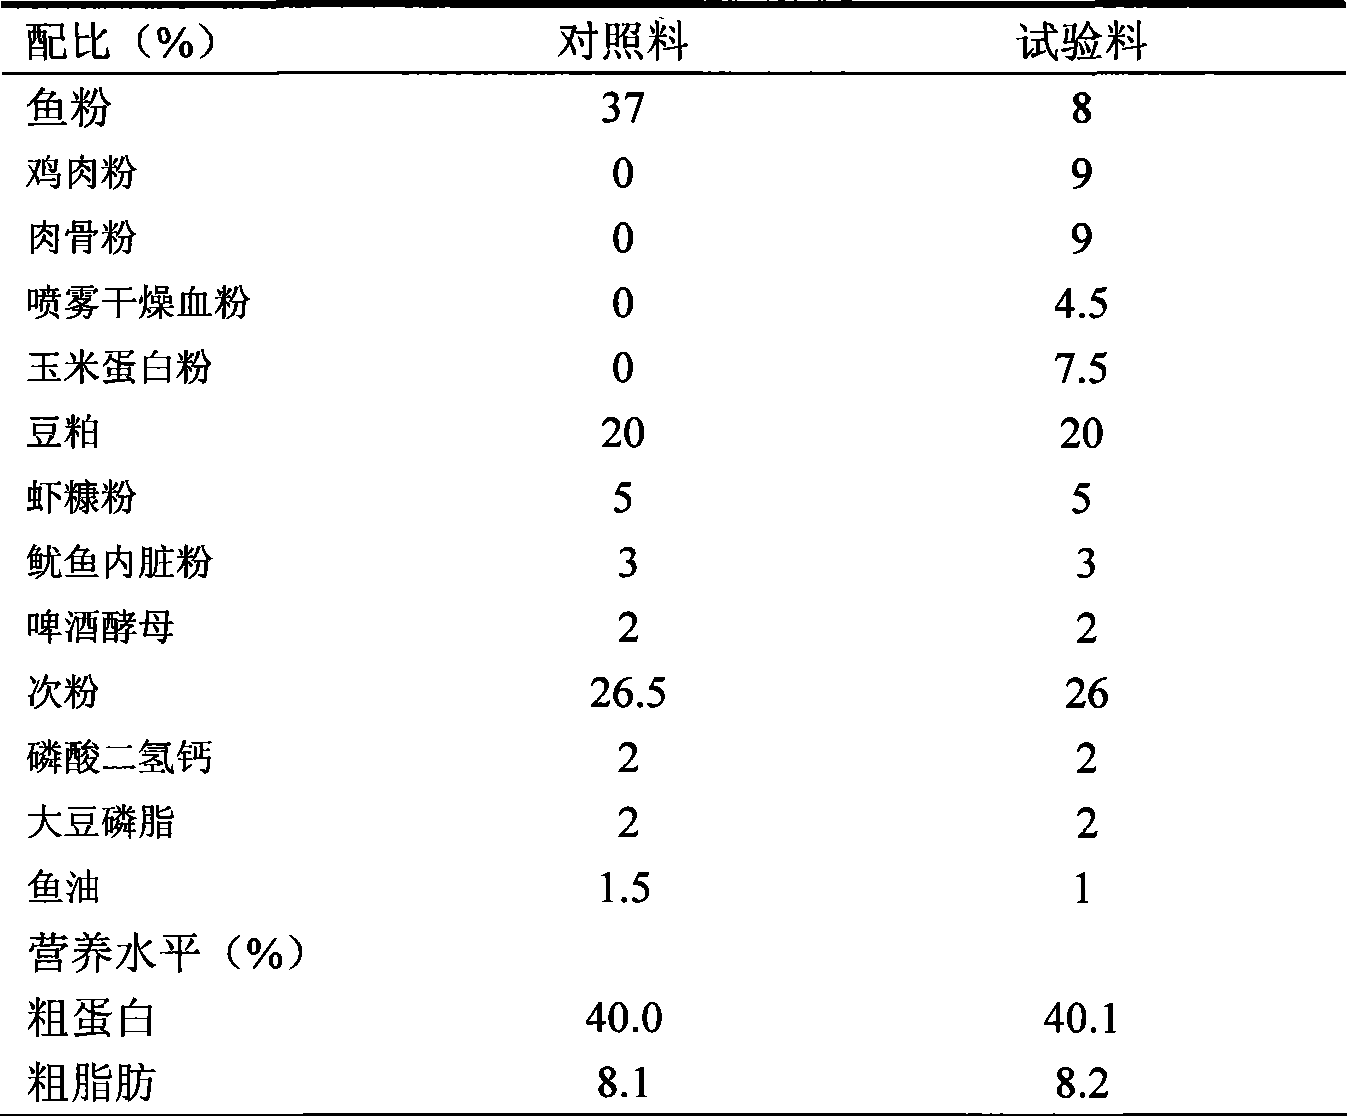 Compound feed for shrimp and method for preparing the same